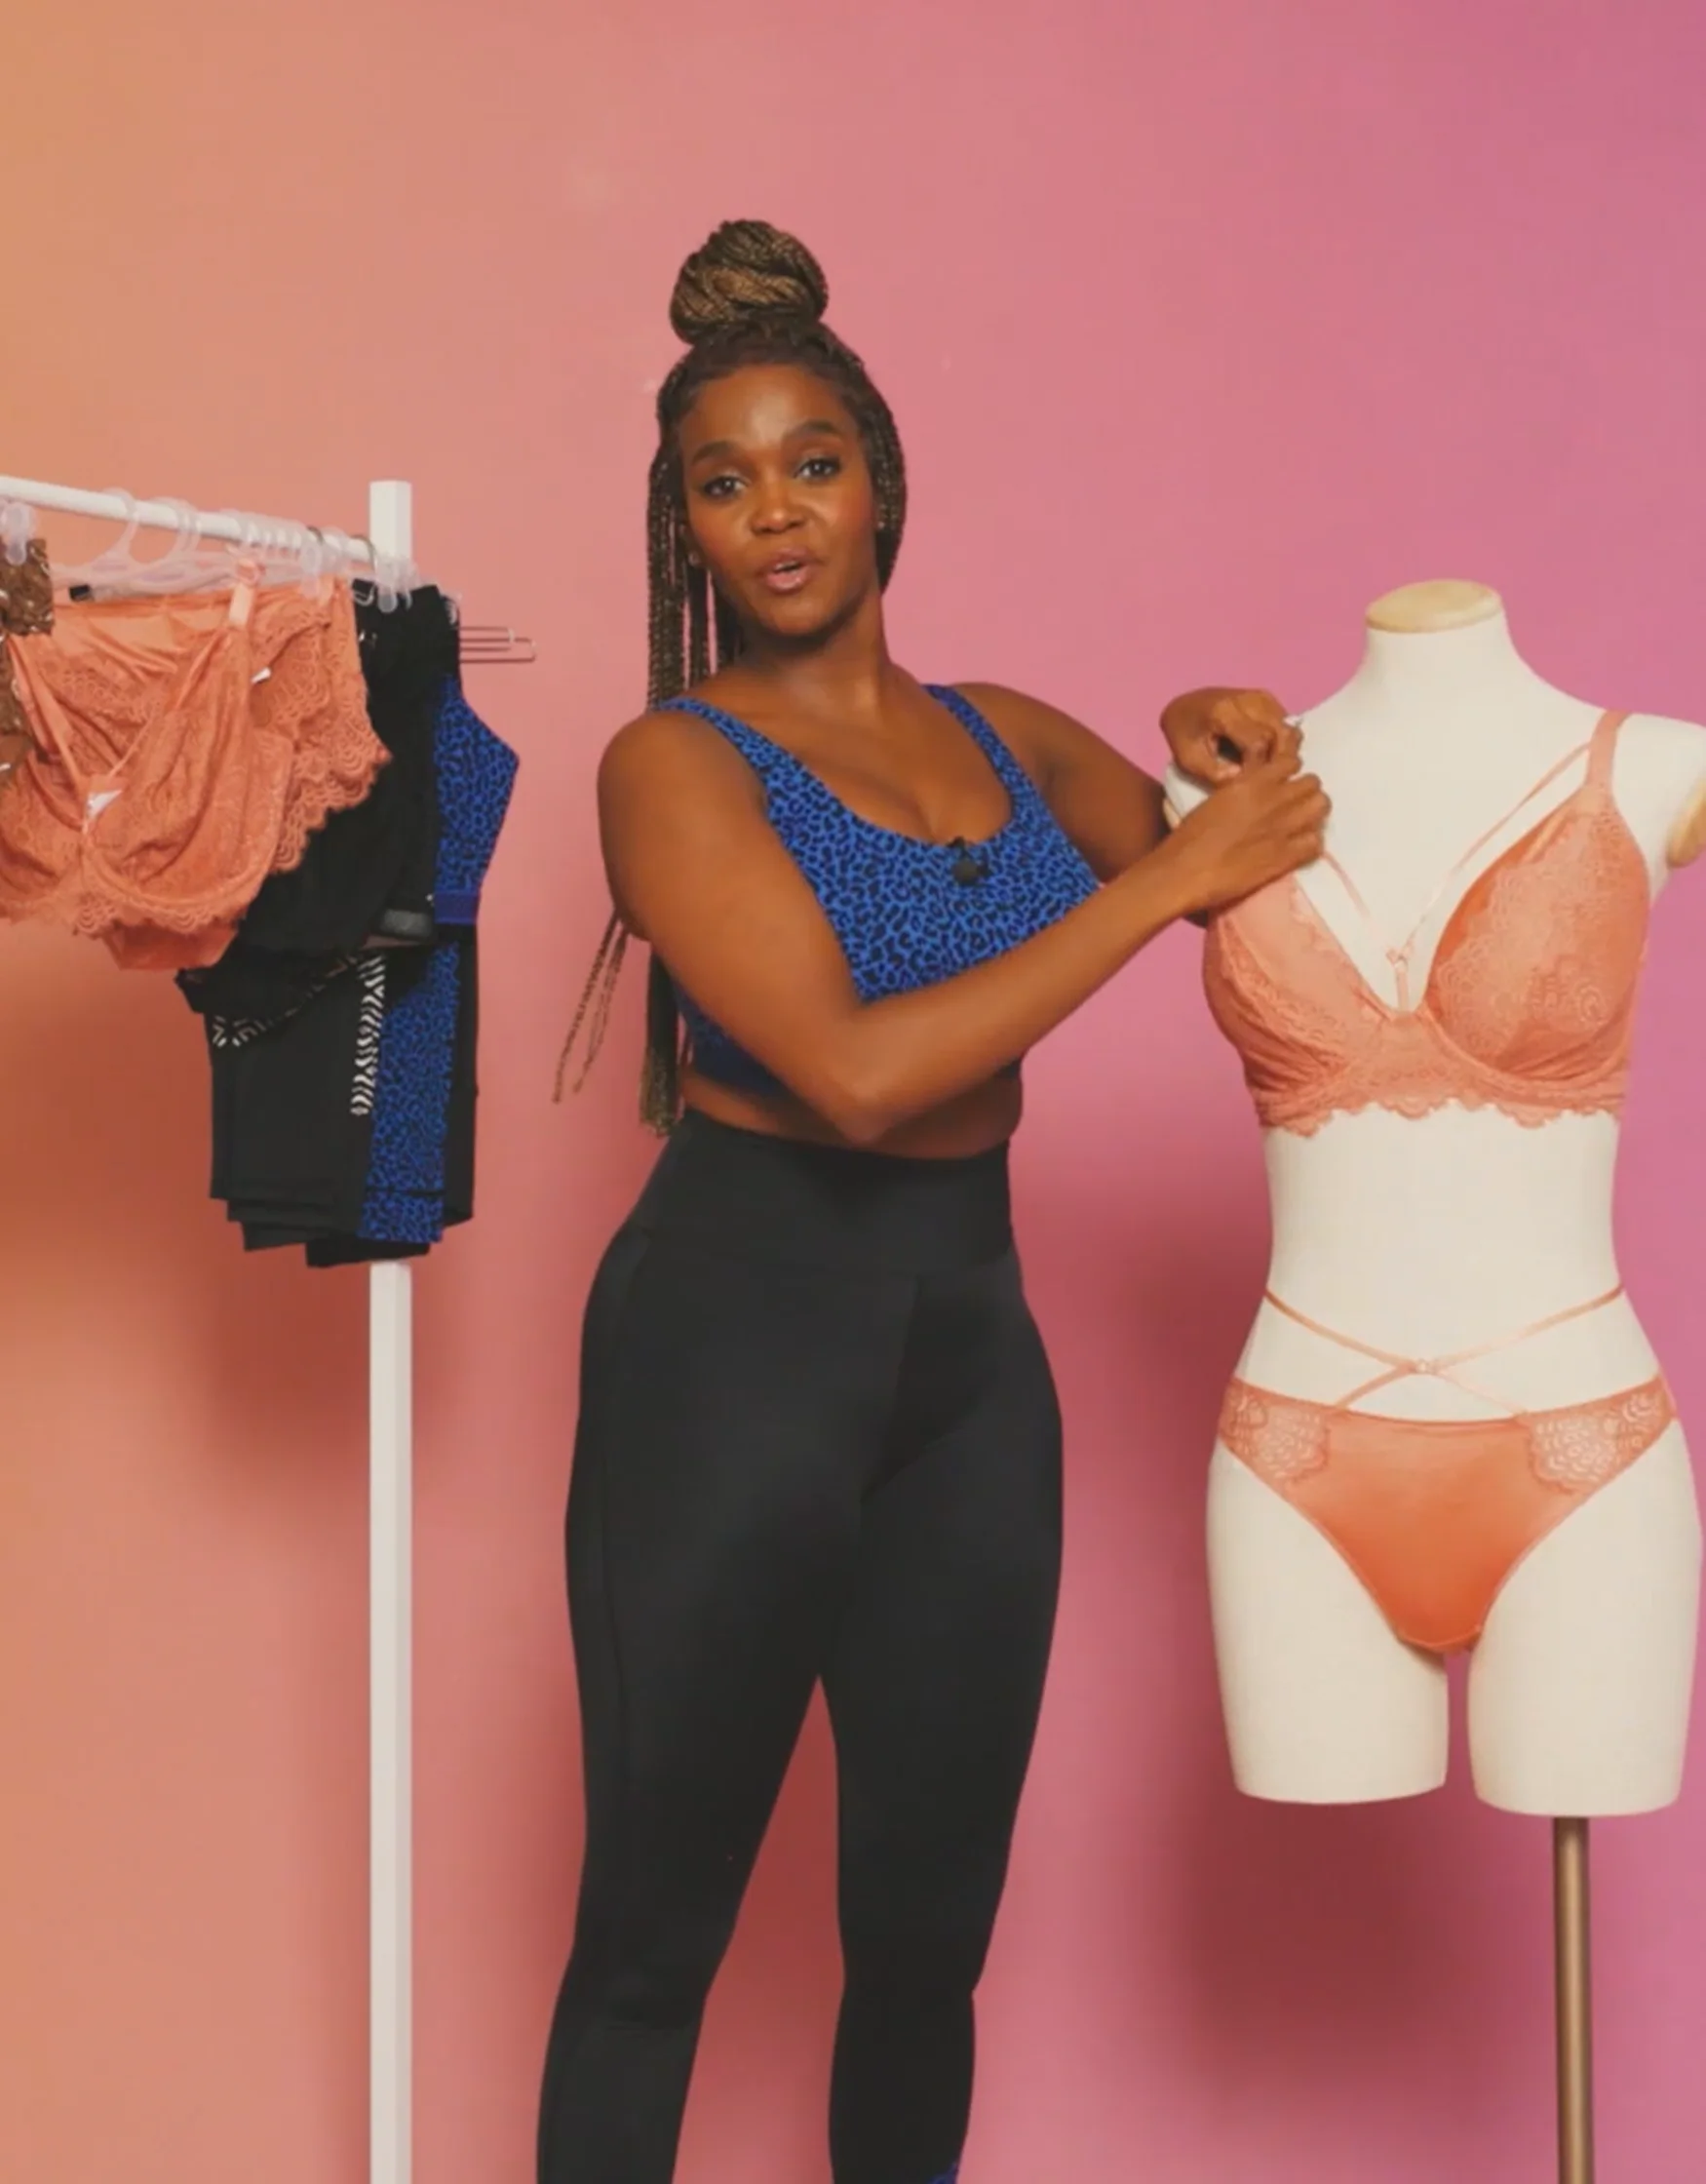 5 ways to get fitted for a bra with Bravissimo on Vimeo